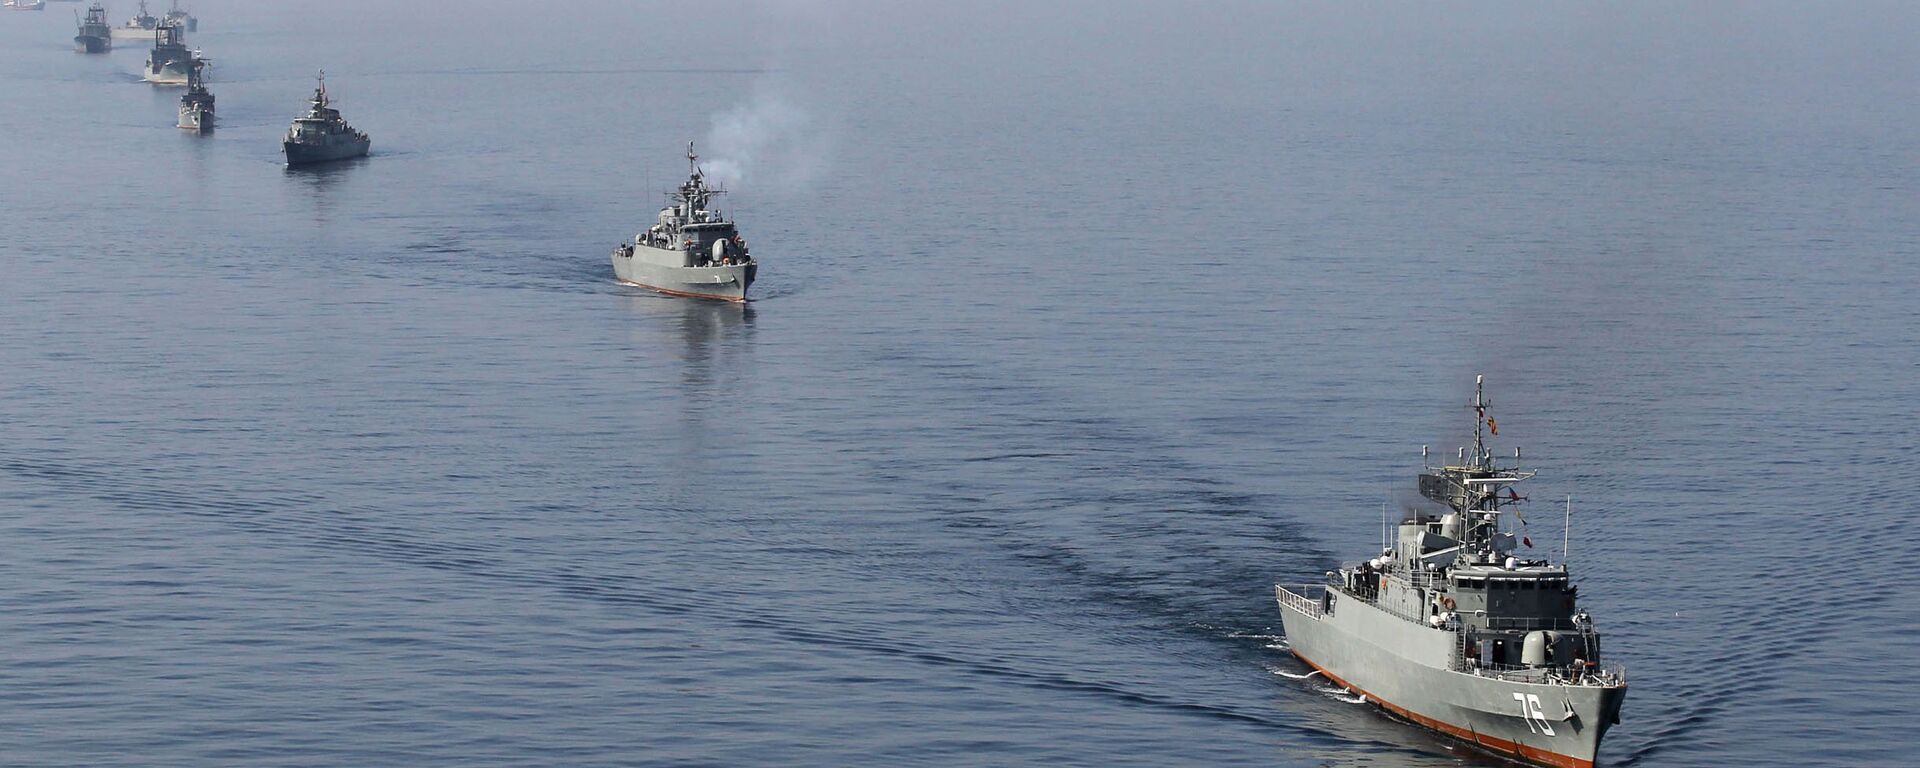 Iranian Navy boats take part in maneuvers during the Velayat-90 navy exercises in the Strait of Hormuz in southern Iran (File) - Sputnik International, 1920, 02.03.2021